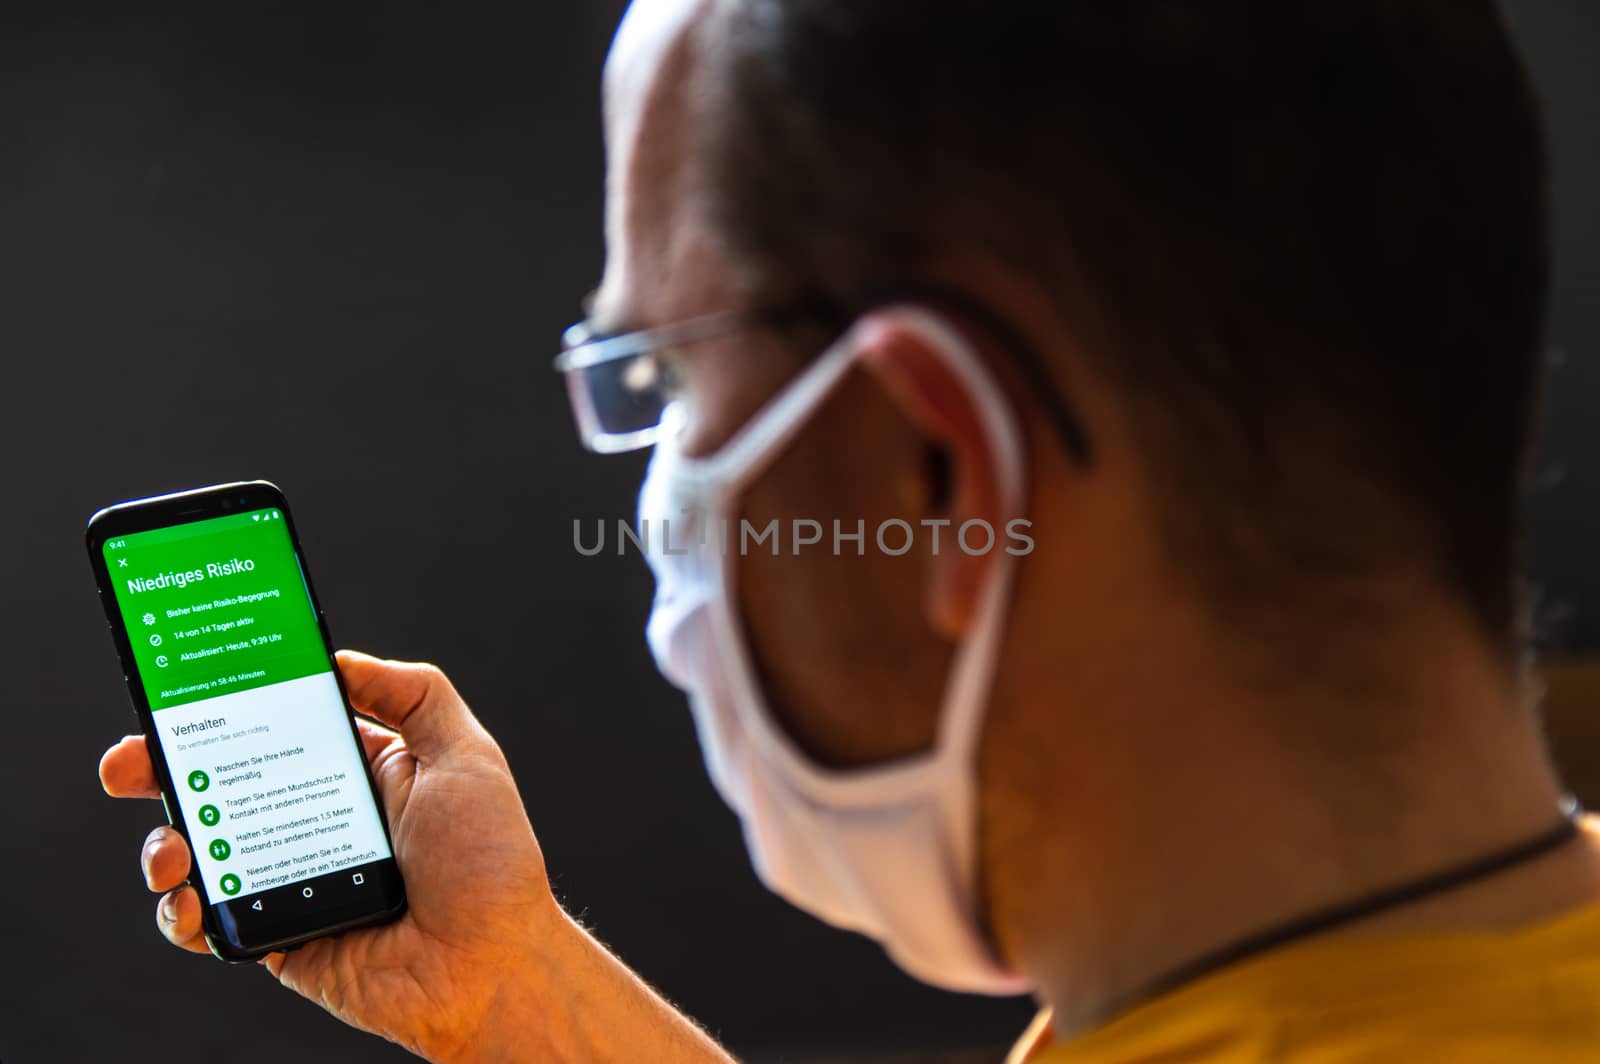 Zittau, Saxony / Germany, June 5th 2020: Young man wearing a protective face mask checks the German corona warn app for his infection risk analysis. Niedriges Risiko = German for Low Risk, Shallow DOF